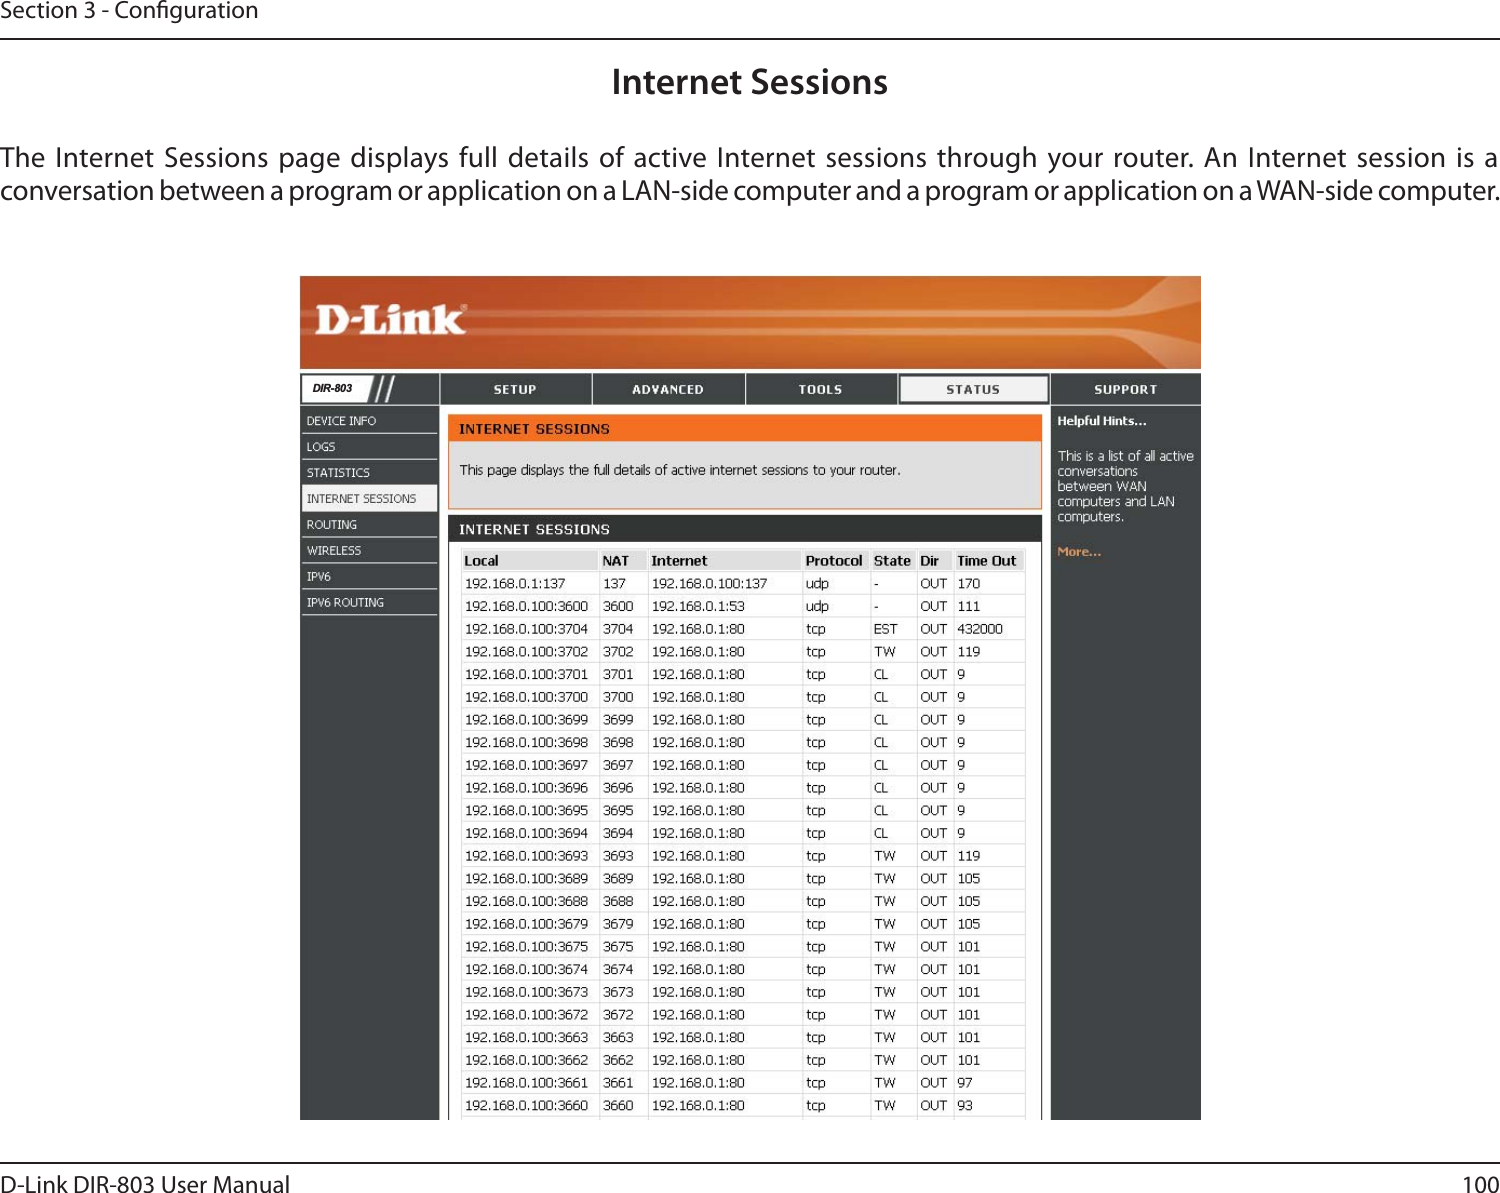 100D-Link DIR-803 User ManualSection 3 - CongurationInternet SessionsThe Internet Sessions page displays full details of active Internet sessions through your router. An Internet session is a conversation between a program or application on a LAN-side computer and a program or application on a WAN-side computer. &apos;,5